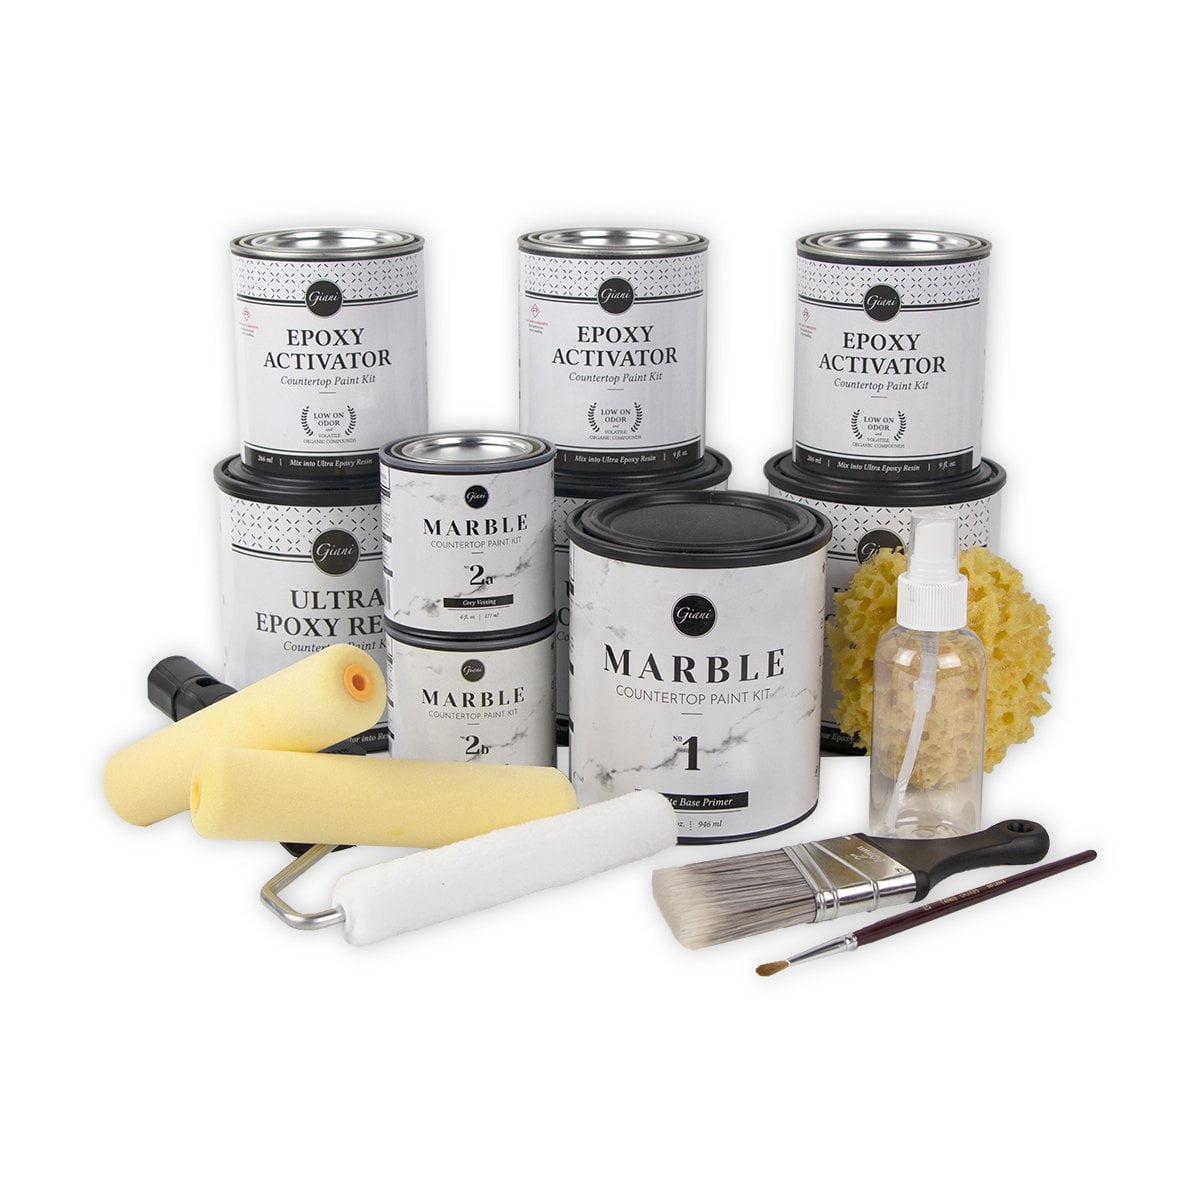 White Marble Countertop Paint Kit, Marble Countertop Paint Kit Home Depot Canada